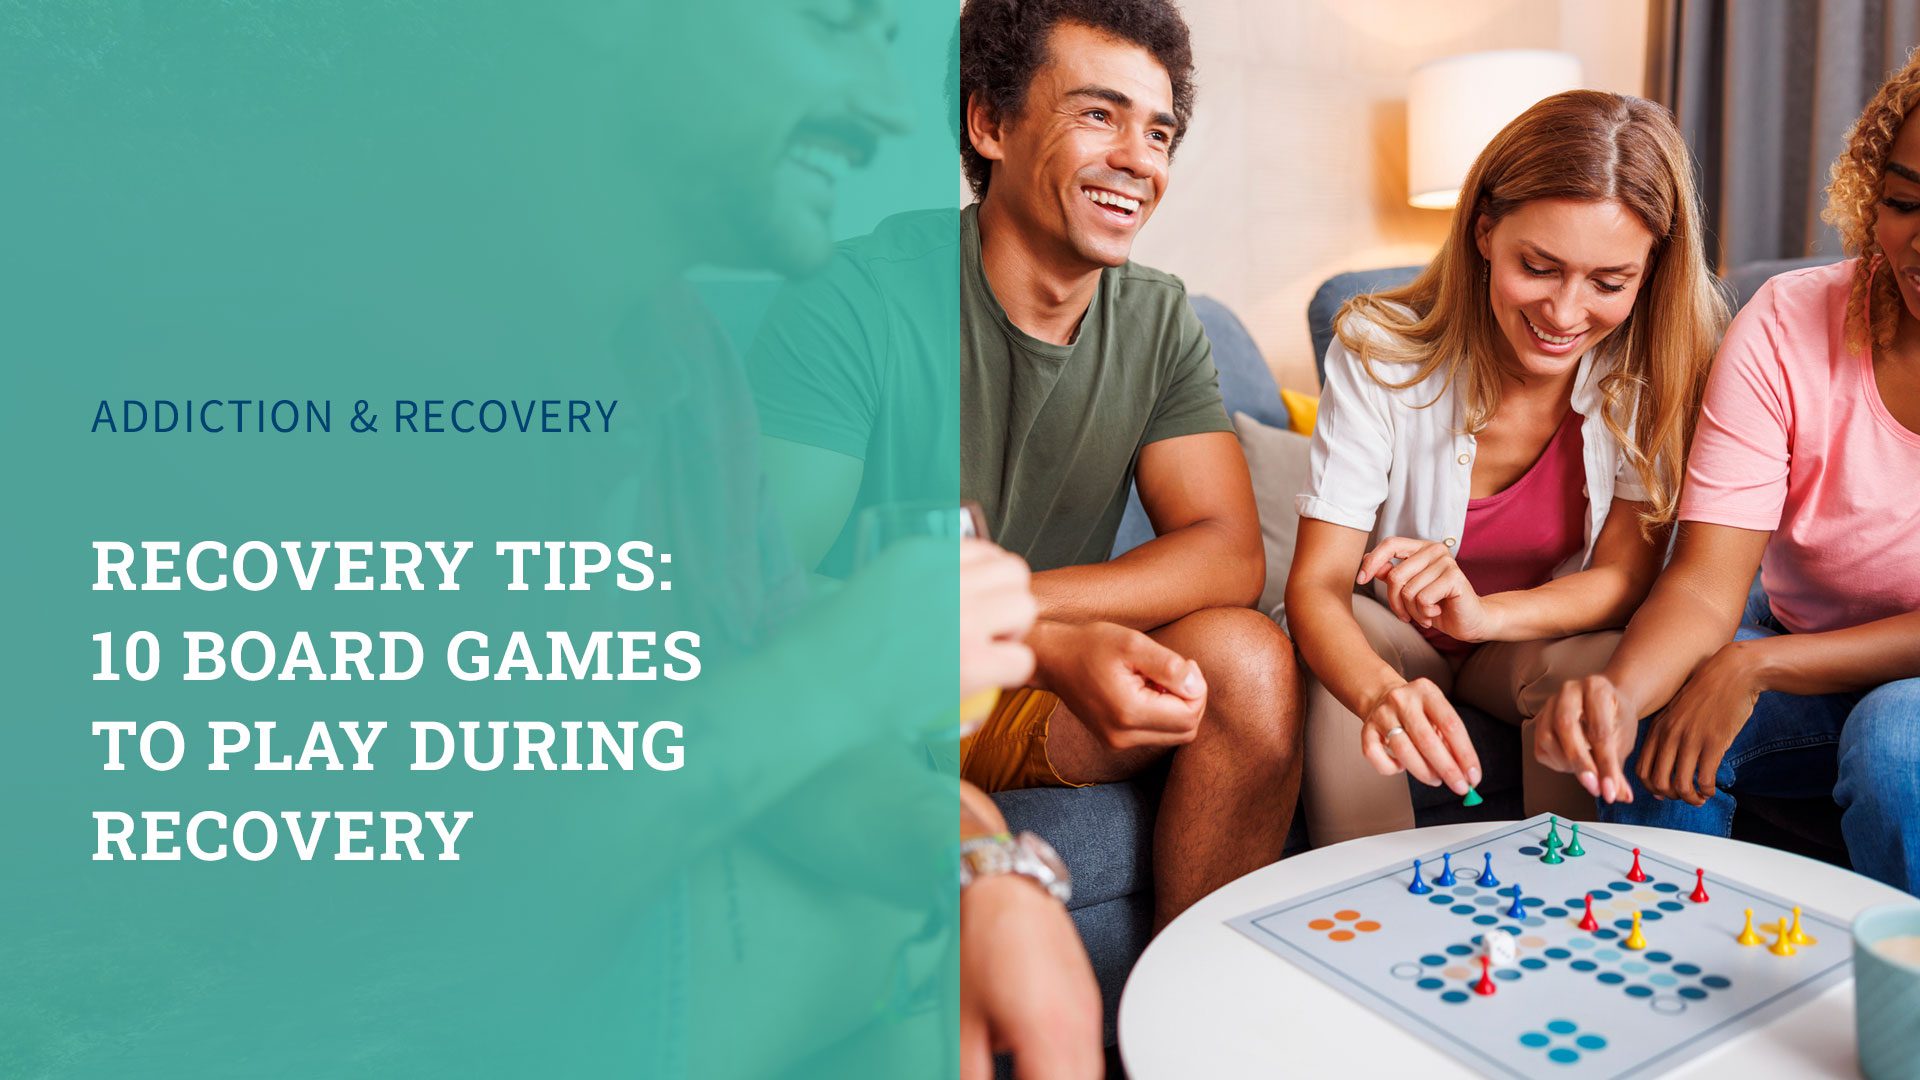 Recovery Tips: 10 Board Games to Play During Recovery